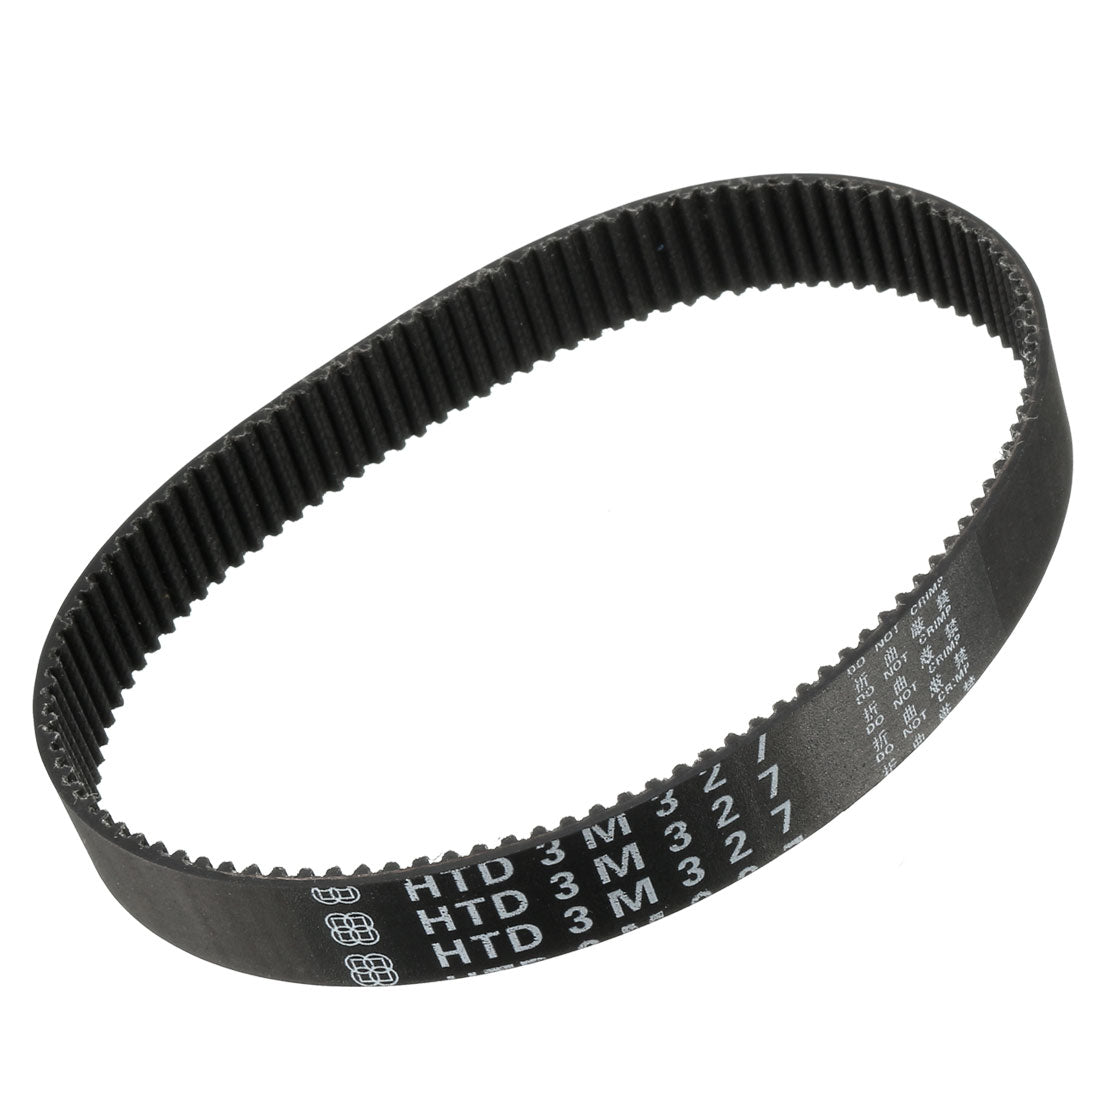 uxcell Uxcell HTD3M 109 Teeth Engine Timing Belt Rubber Geared-Belt 327mm Girth 15mm Width